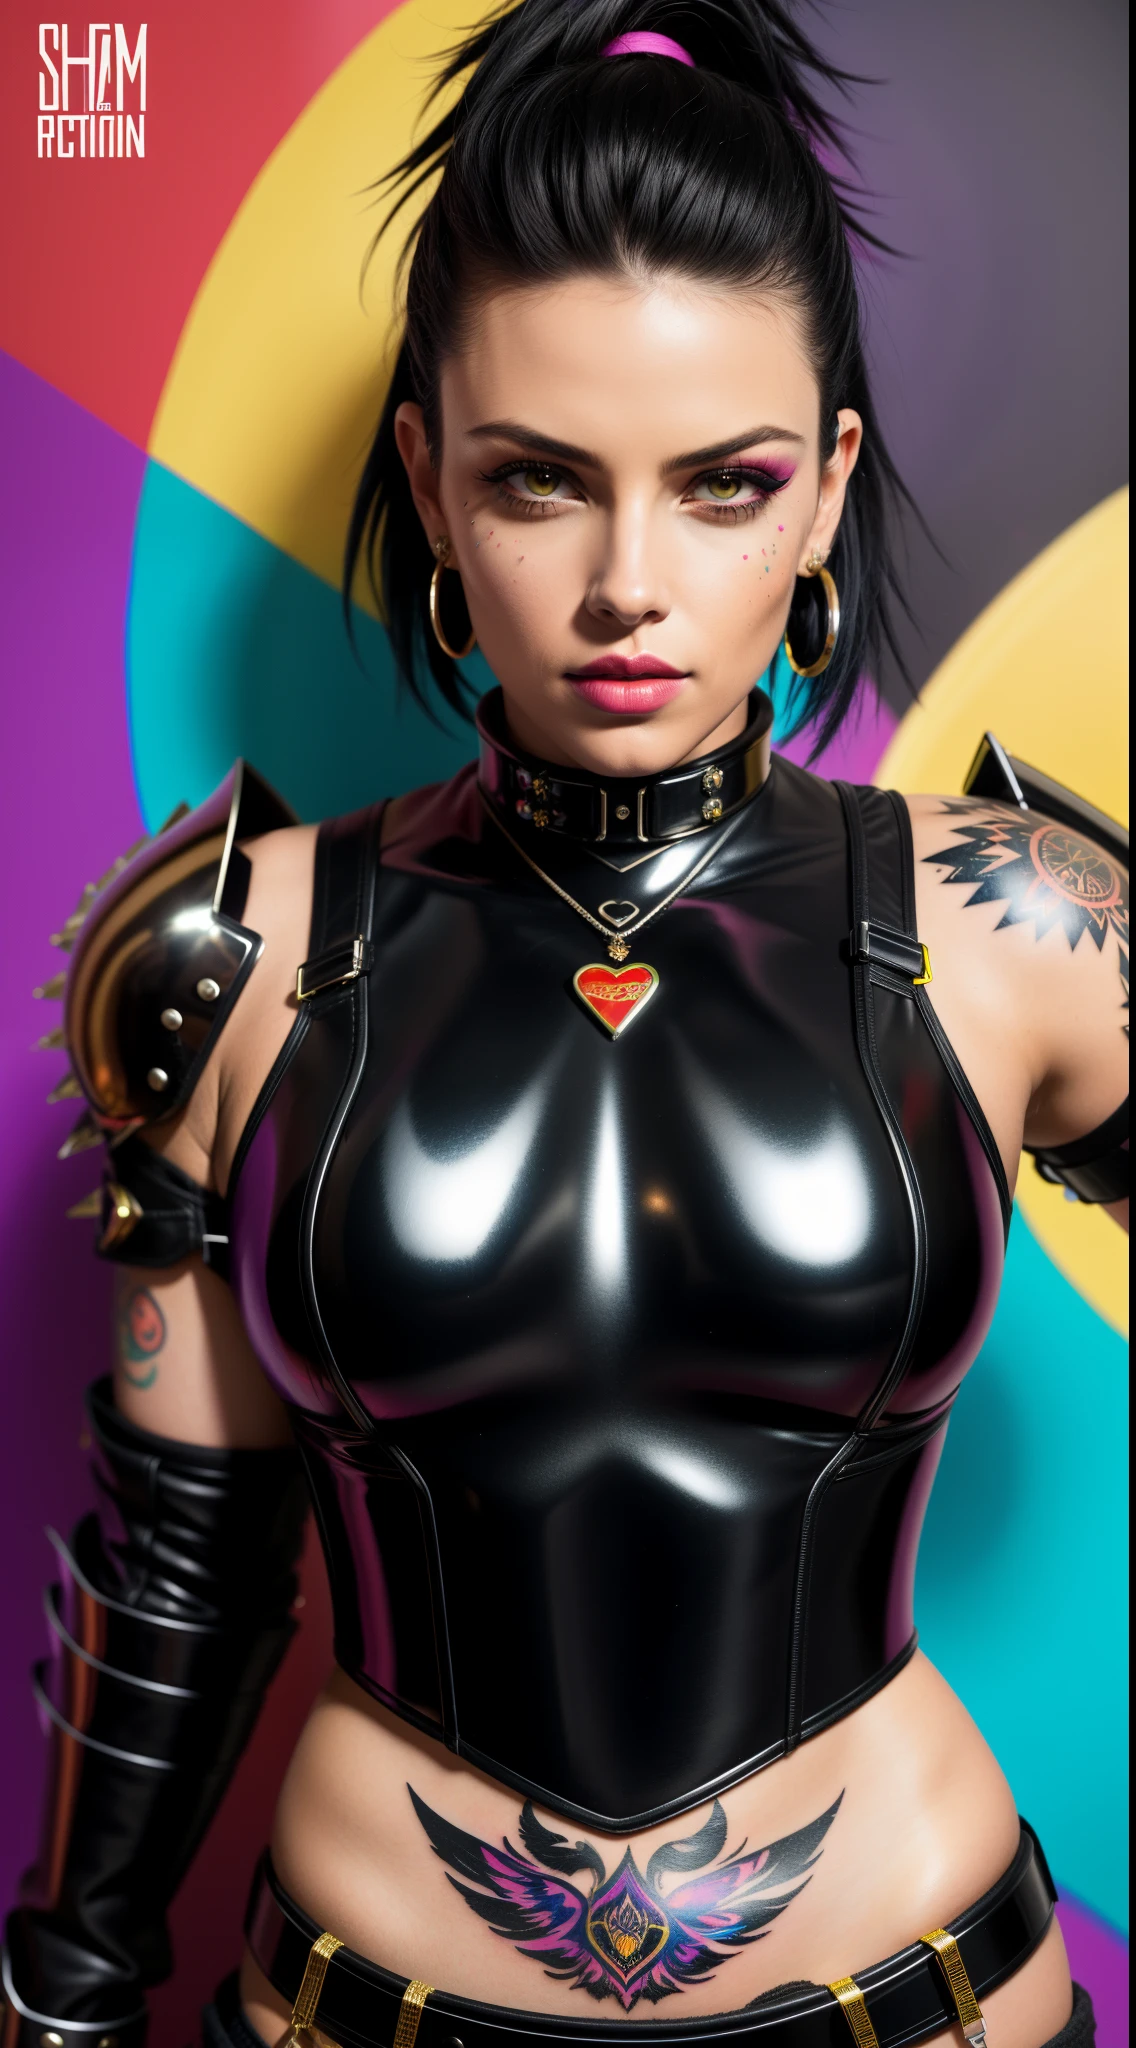 photo of woman, sexy, large breasts, punk, black hair, one side shaved head, ([Britney Spears|Ashley Greene|Amber Heard]:0.85), [stanleylau style|uodenim style], armor suit, hips, sensual, shinny skin, oily skin, tattoos, close up, face focus, detailed face, lips, choker, jewelry, [(colorful explosion psychedelic paint colors:1.21)::0.2], kitchen, masterpiece, best quality, rainbow colors, colorful, high contrast,